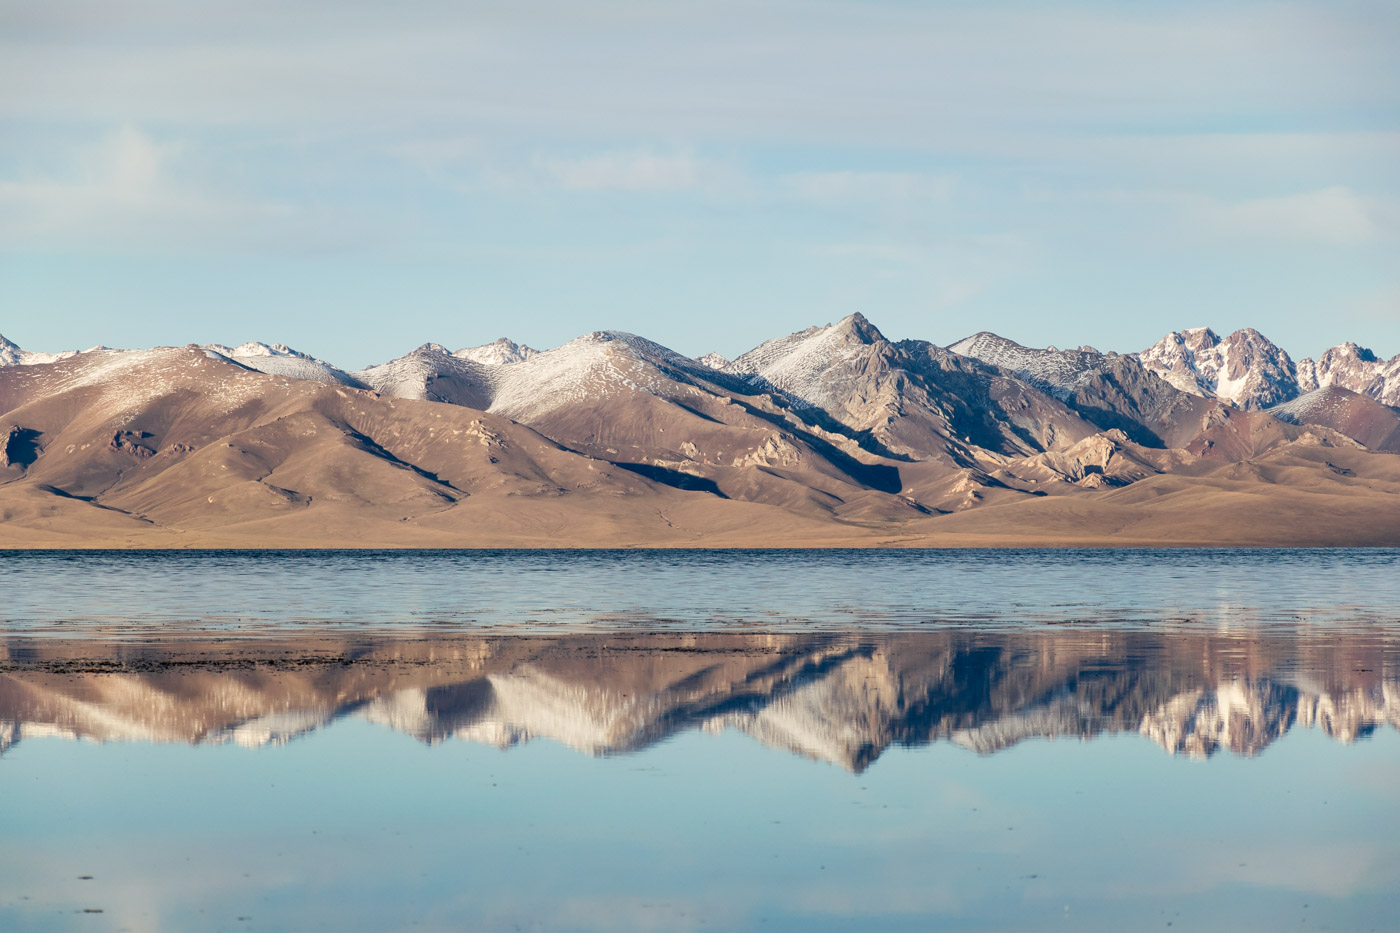 Mountains in Kyrgyzstan reflected in the lake in the mirror effect